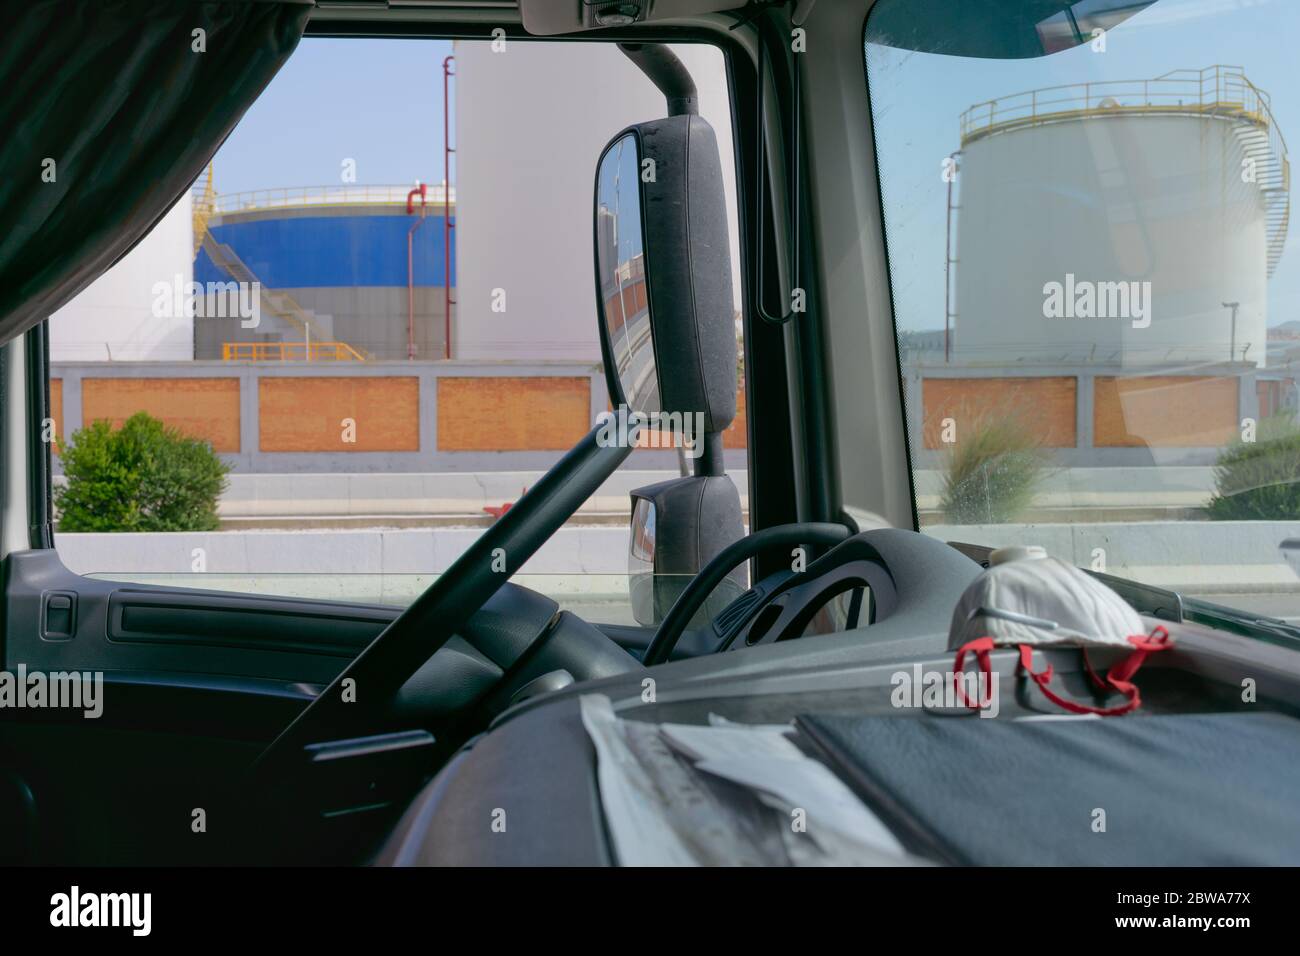 Truck interior, dashboard with a mask and fuel storage tanks in the background Stock Photo